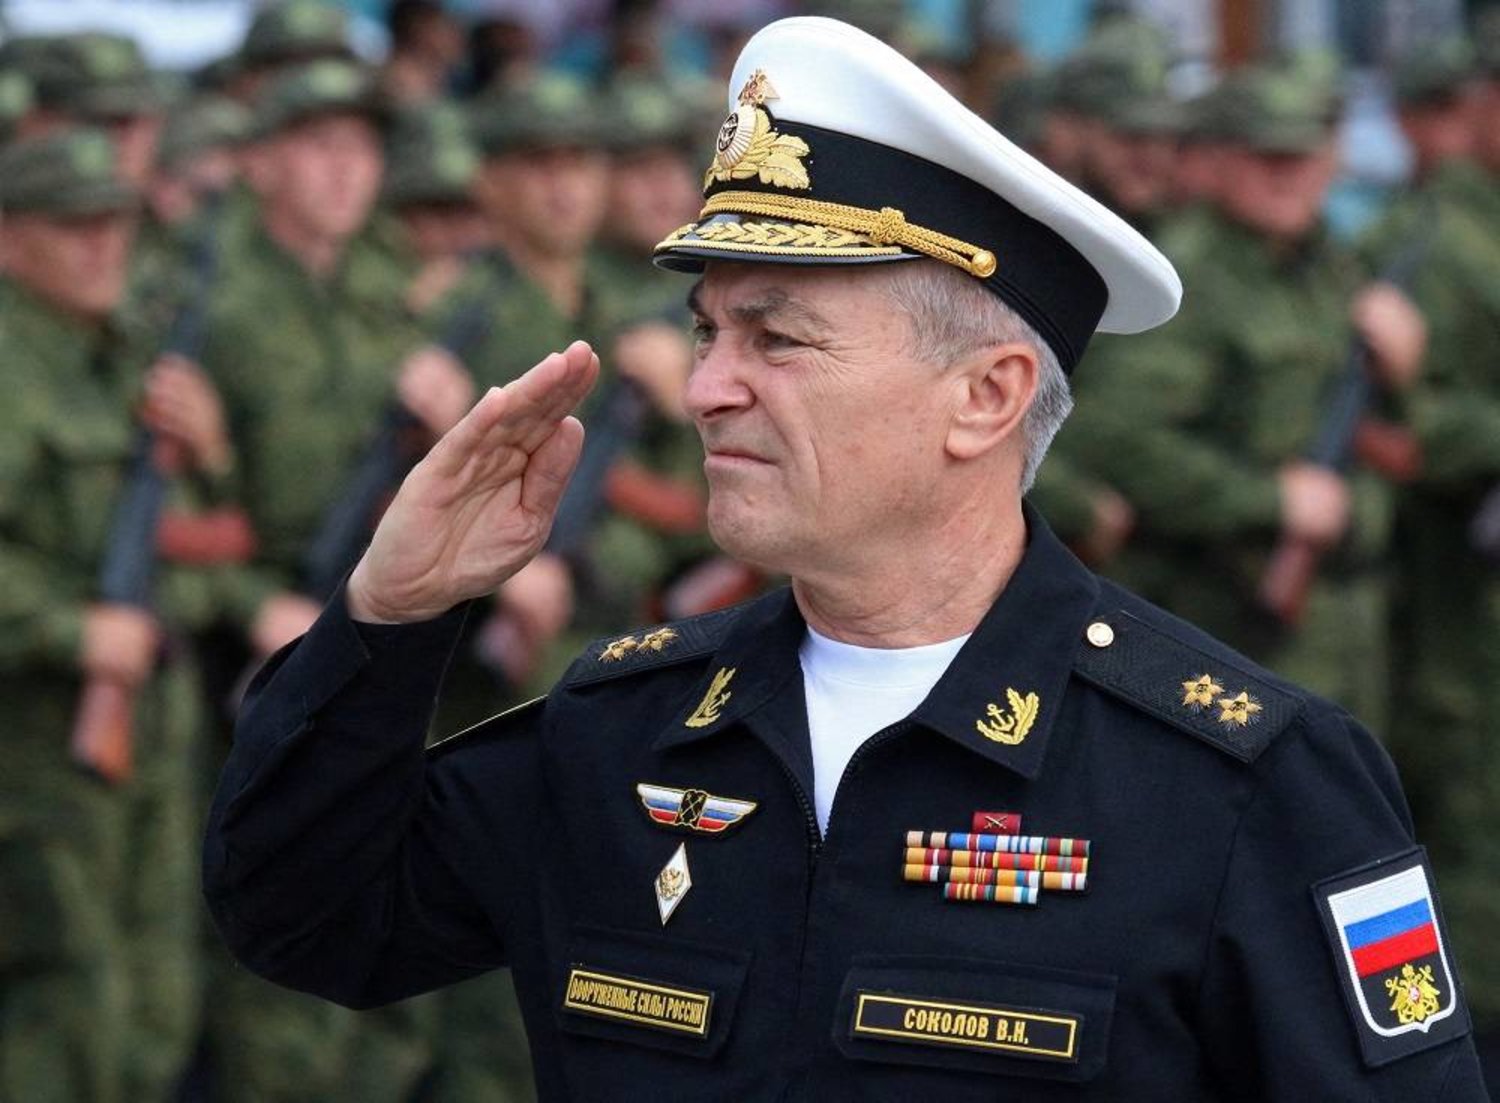 Commander of the Russian Black Sea Fleet Vice-Admiral Viktor Sokolov salutes during a send-off ceremony for reservists drafted during partial mobilisation, in Sevastopol, Crimea September 27, 2022. (Reuters)